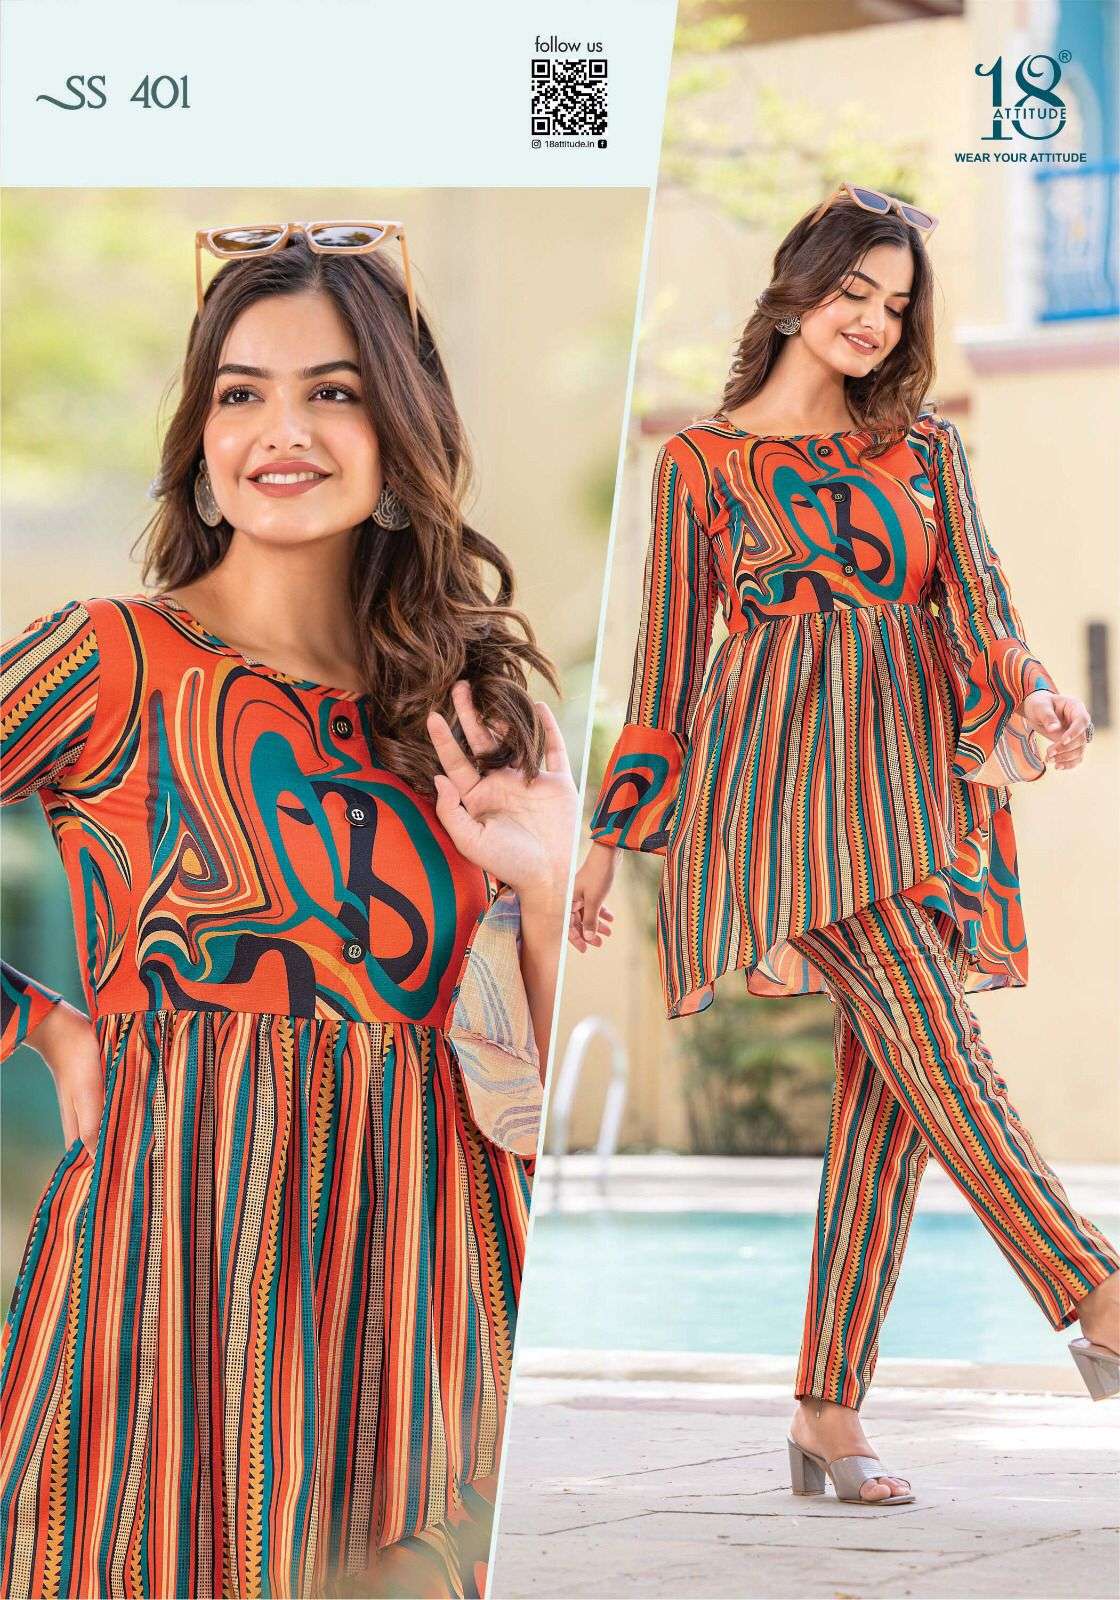 catalogue name shoo shaa vol 4 coord set designer stylish printed coord set for girls trendy coord set in best price for womens